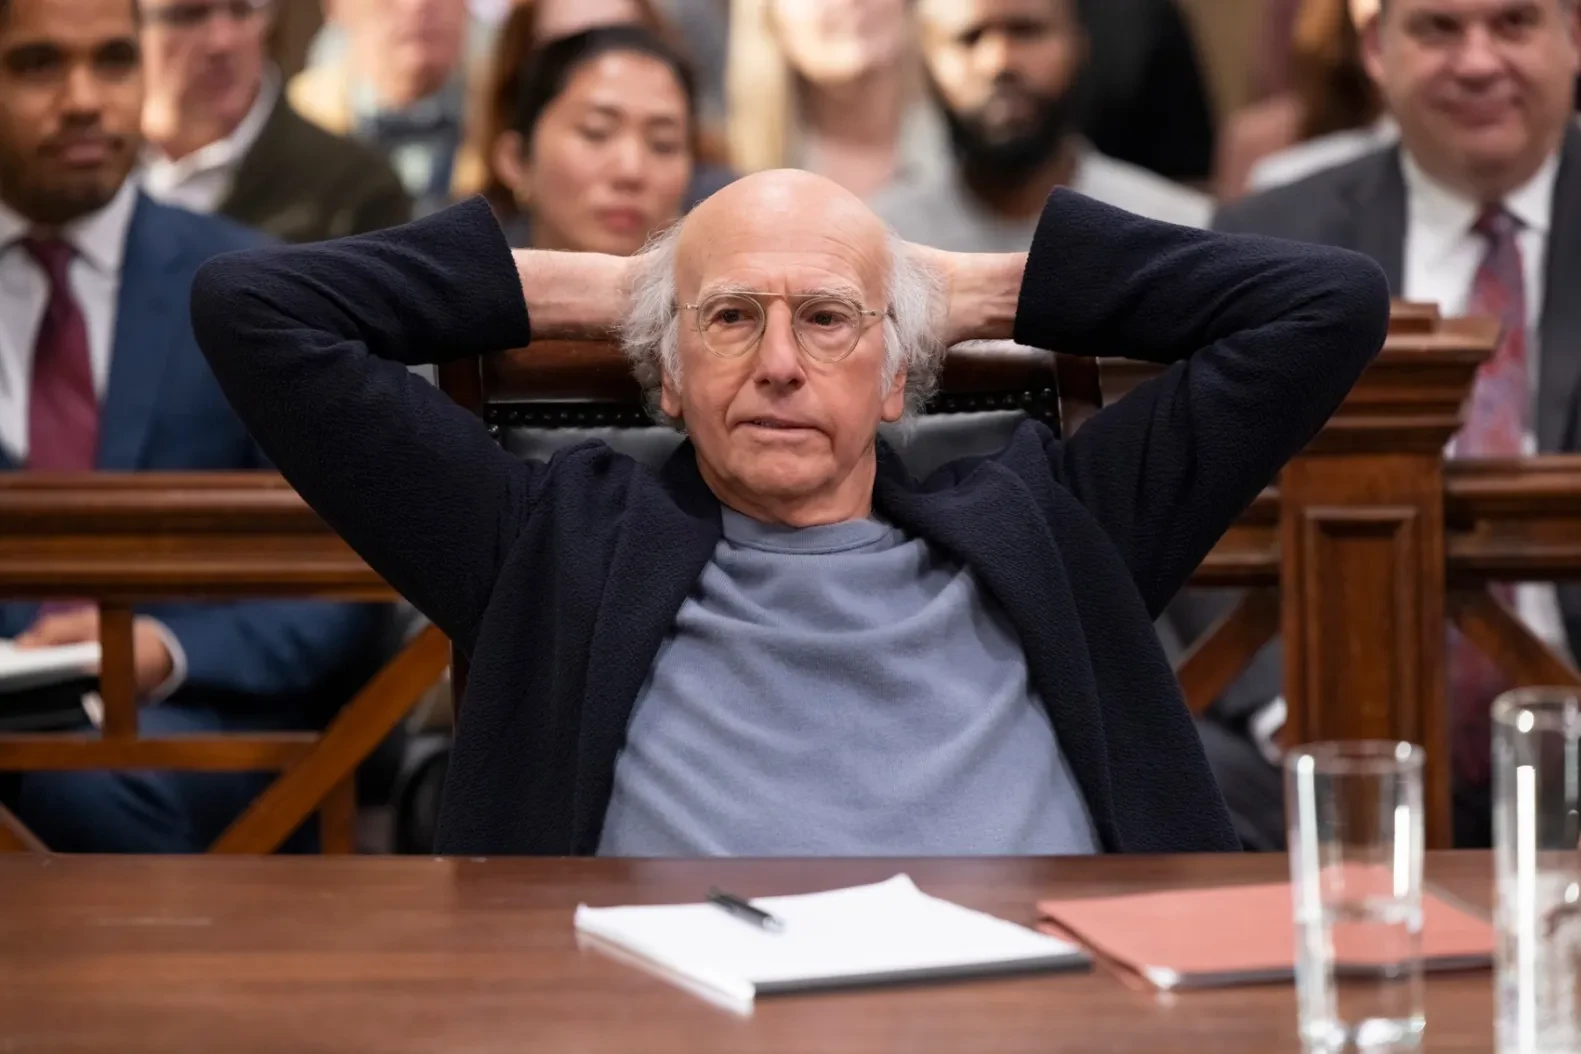 A still from Curb Your Enthusiasm's 12th season